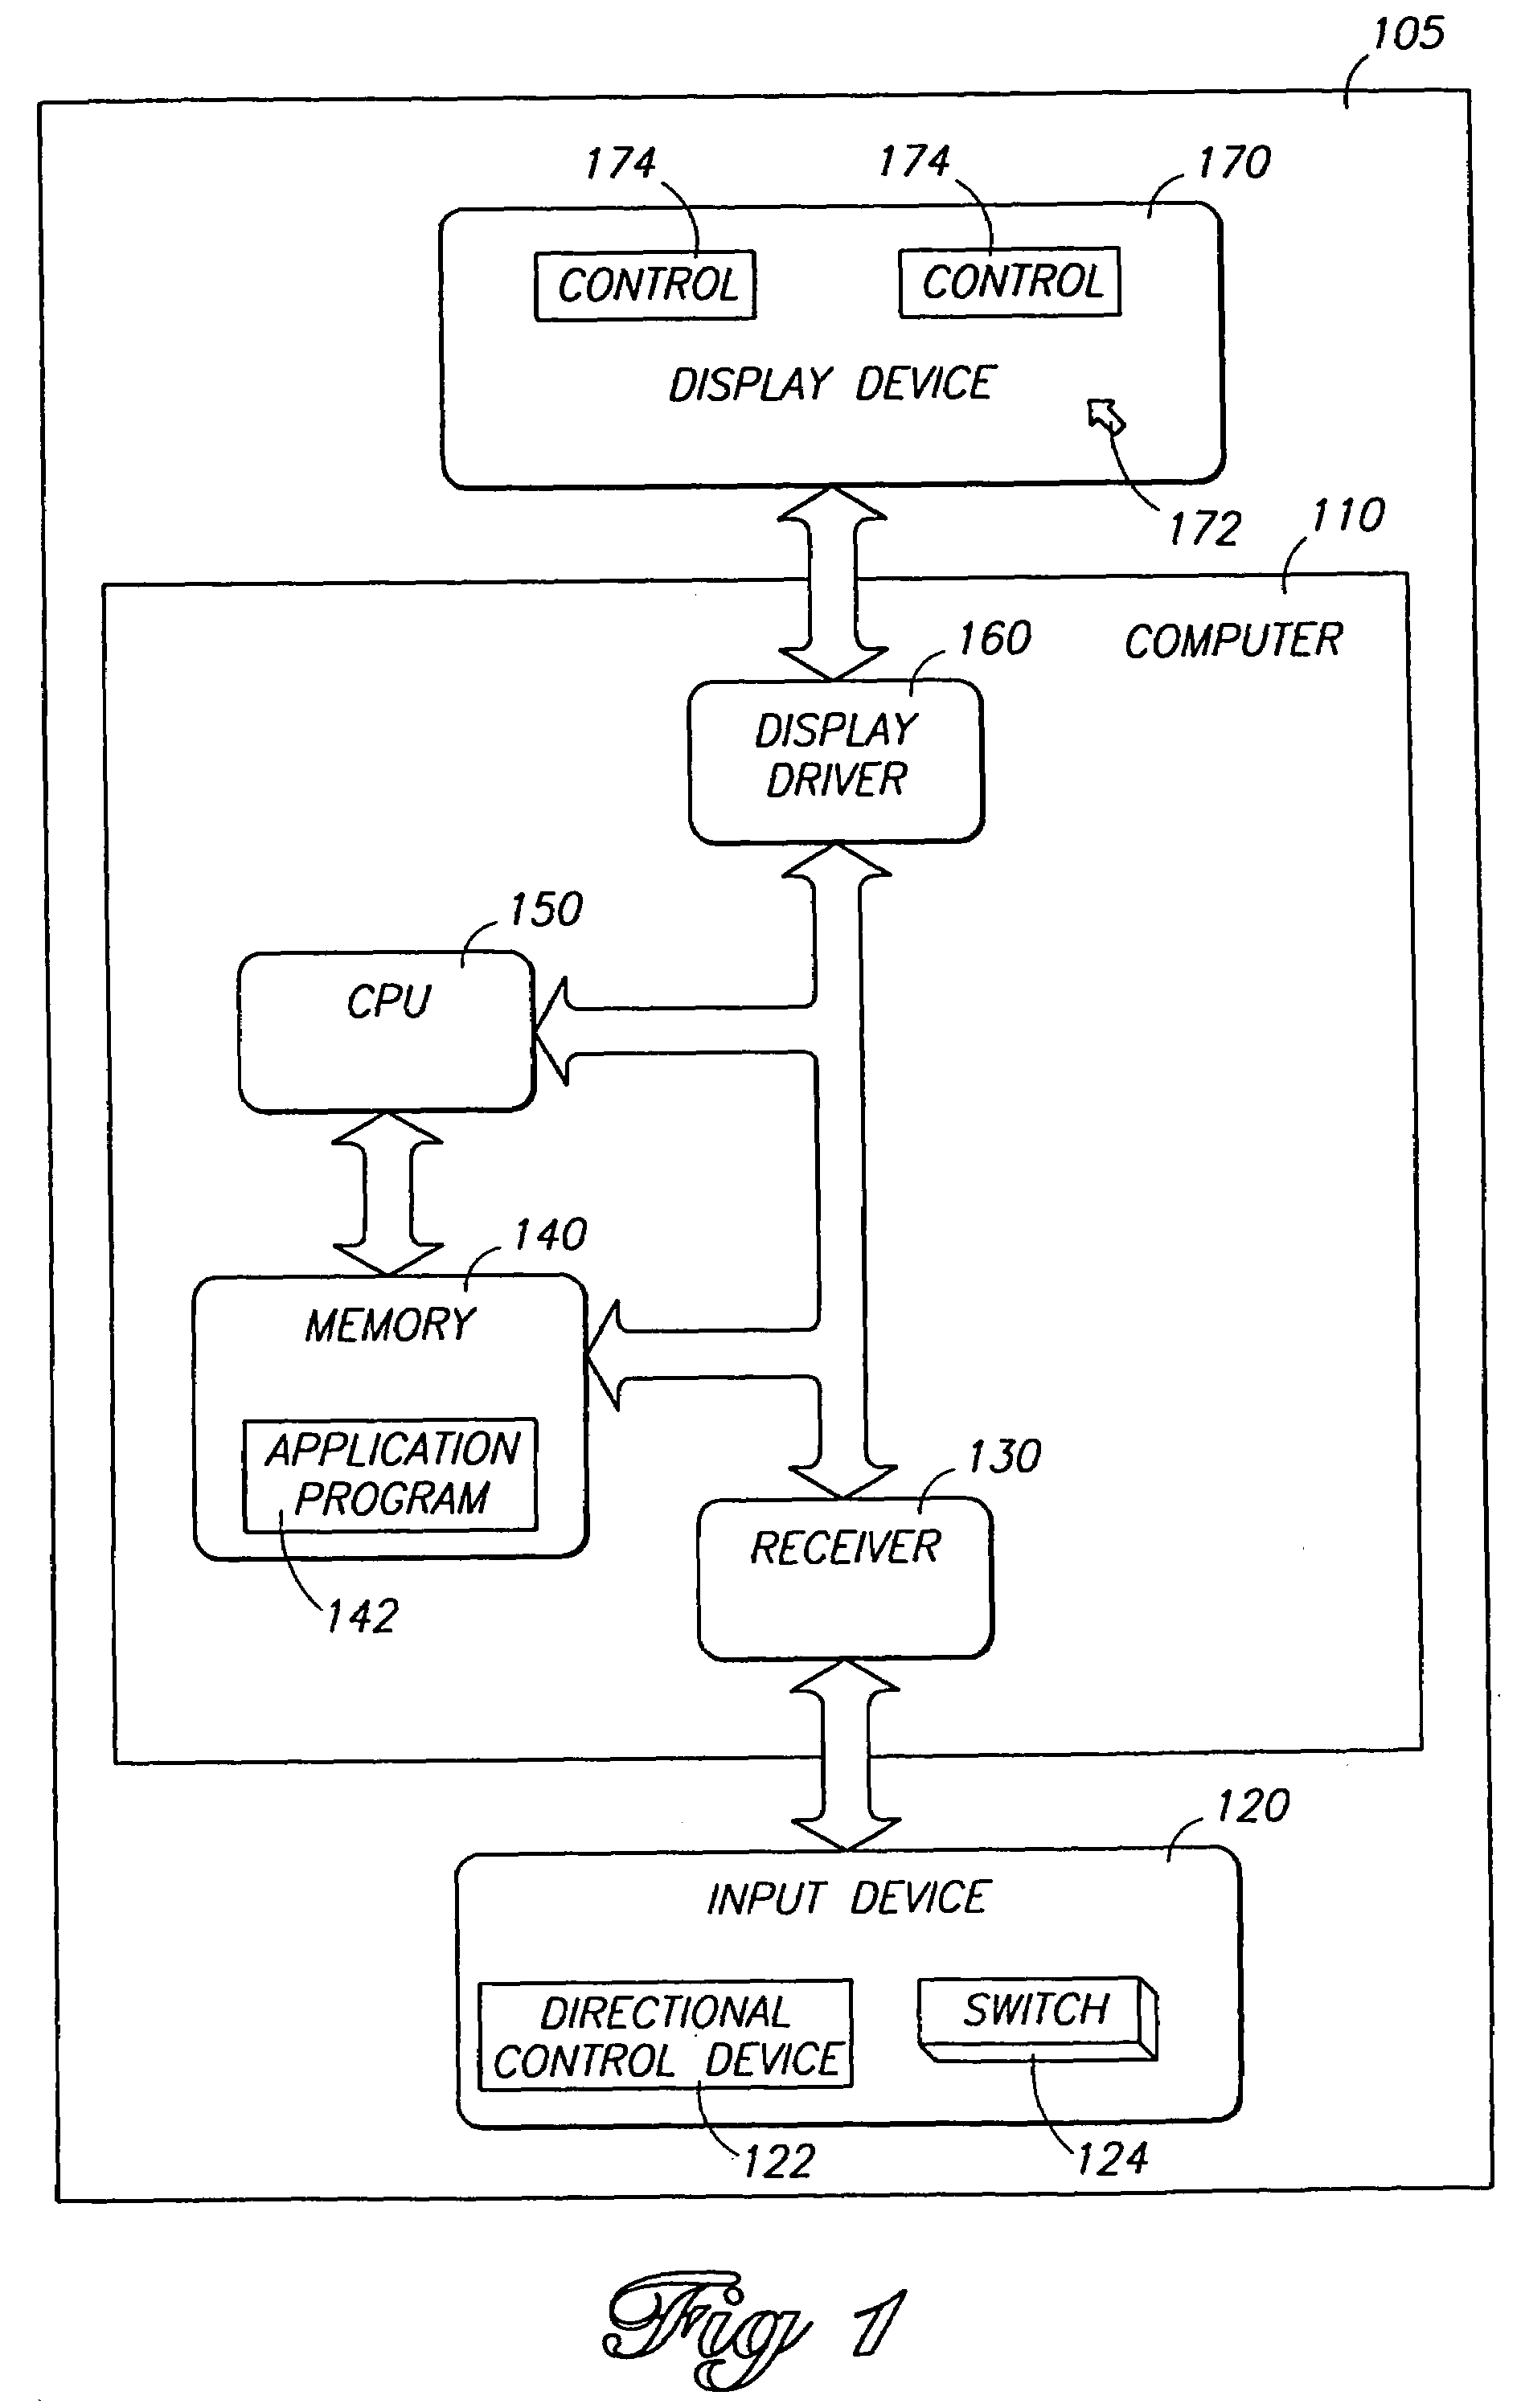 Apparatus and method for automatically positioning a cursor on a control